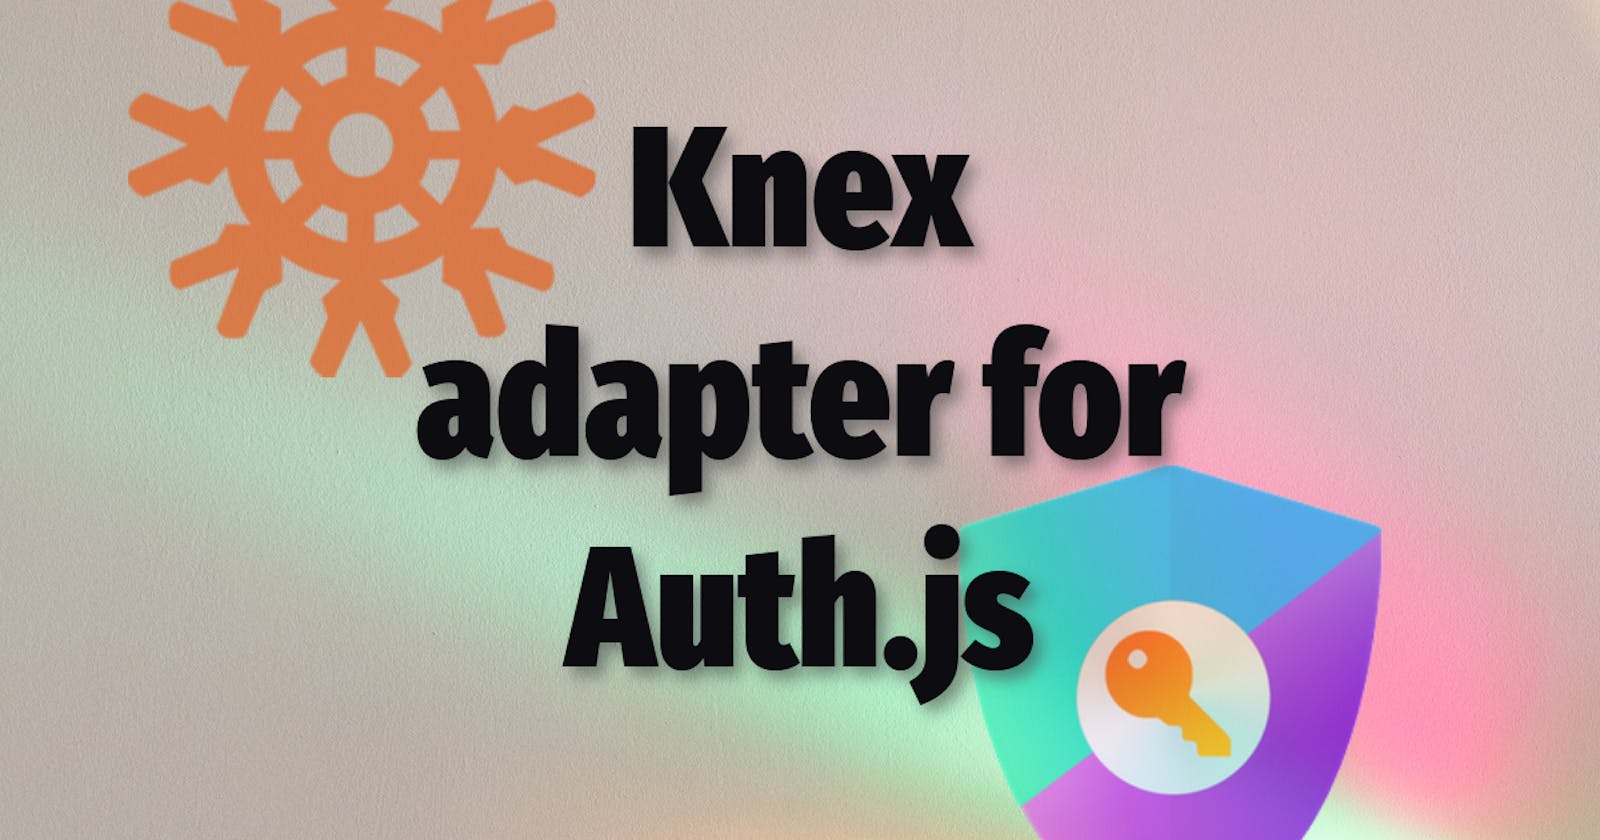 Introducing the Knex Adapter for Auth.js